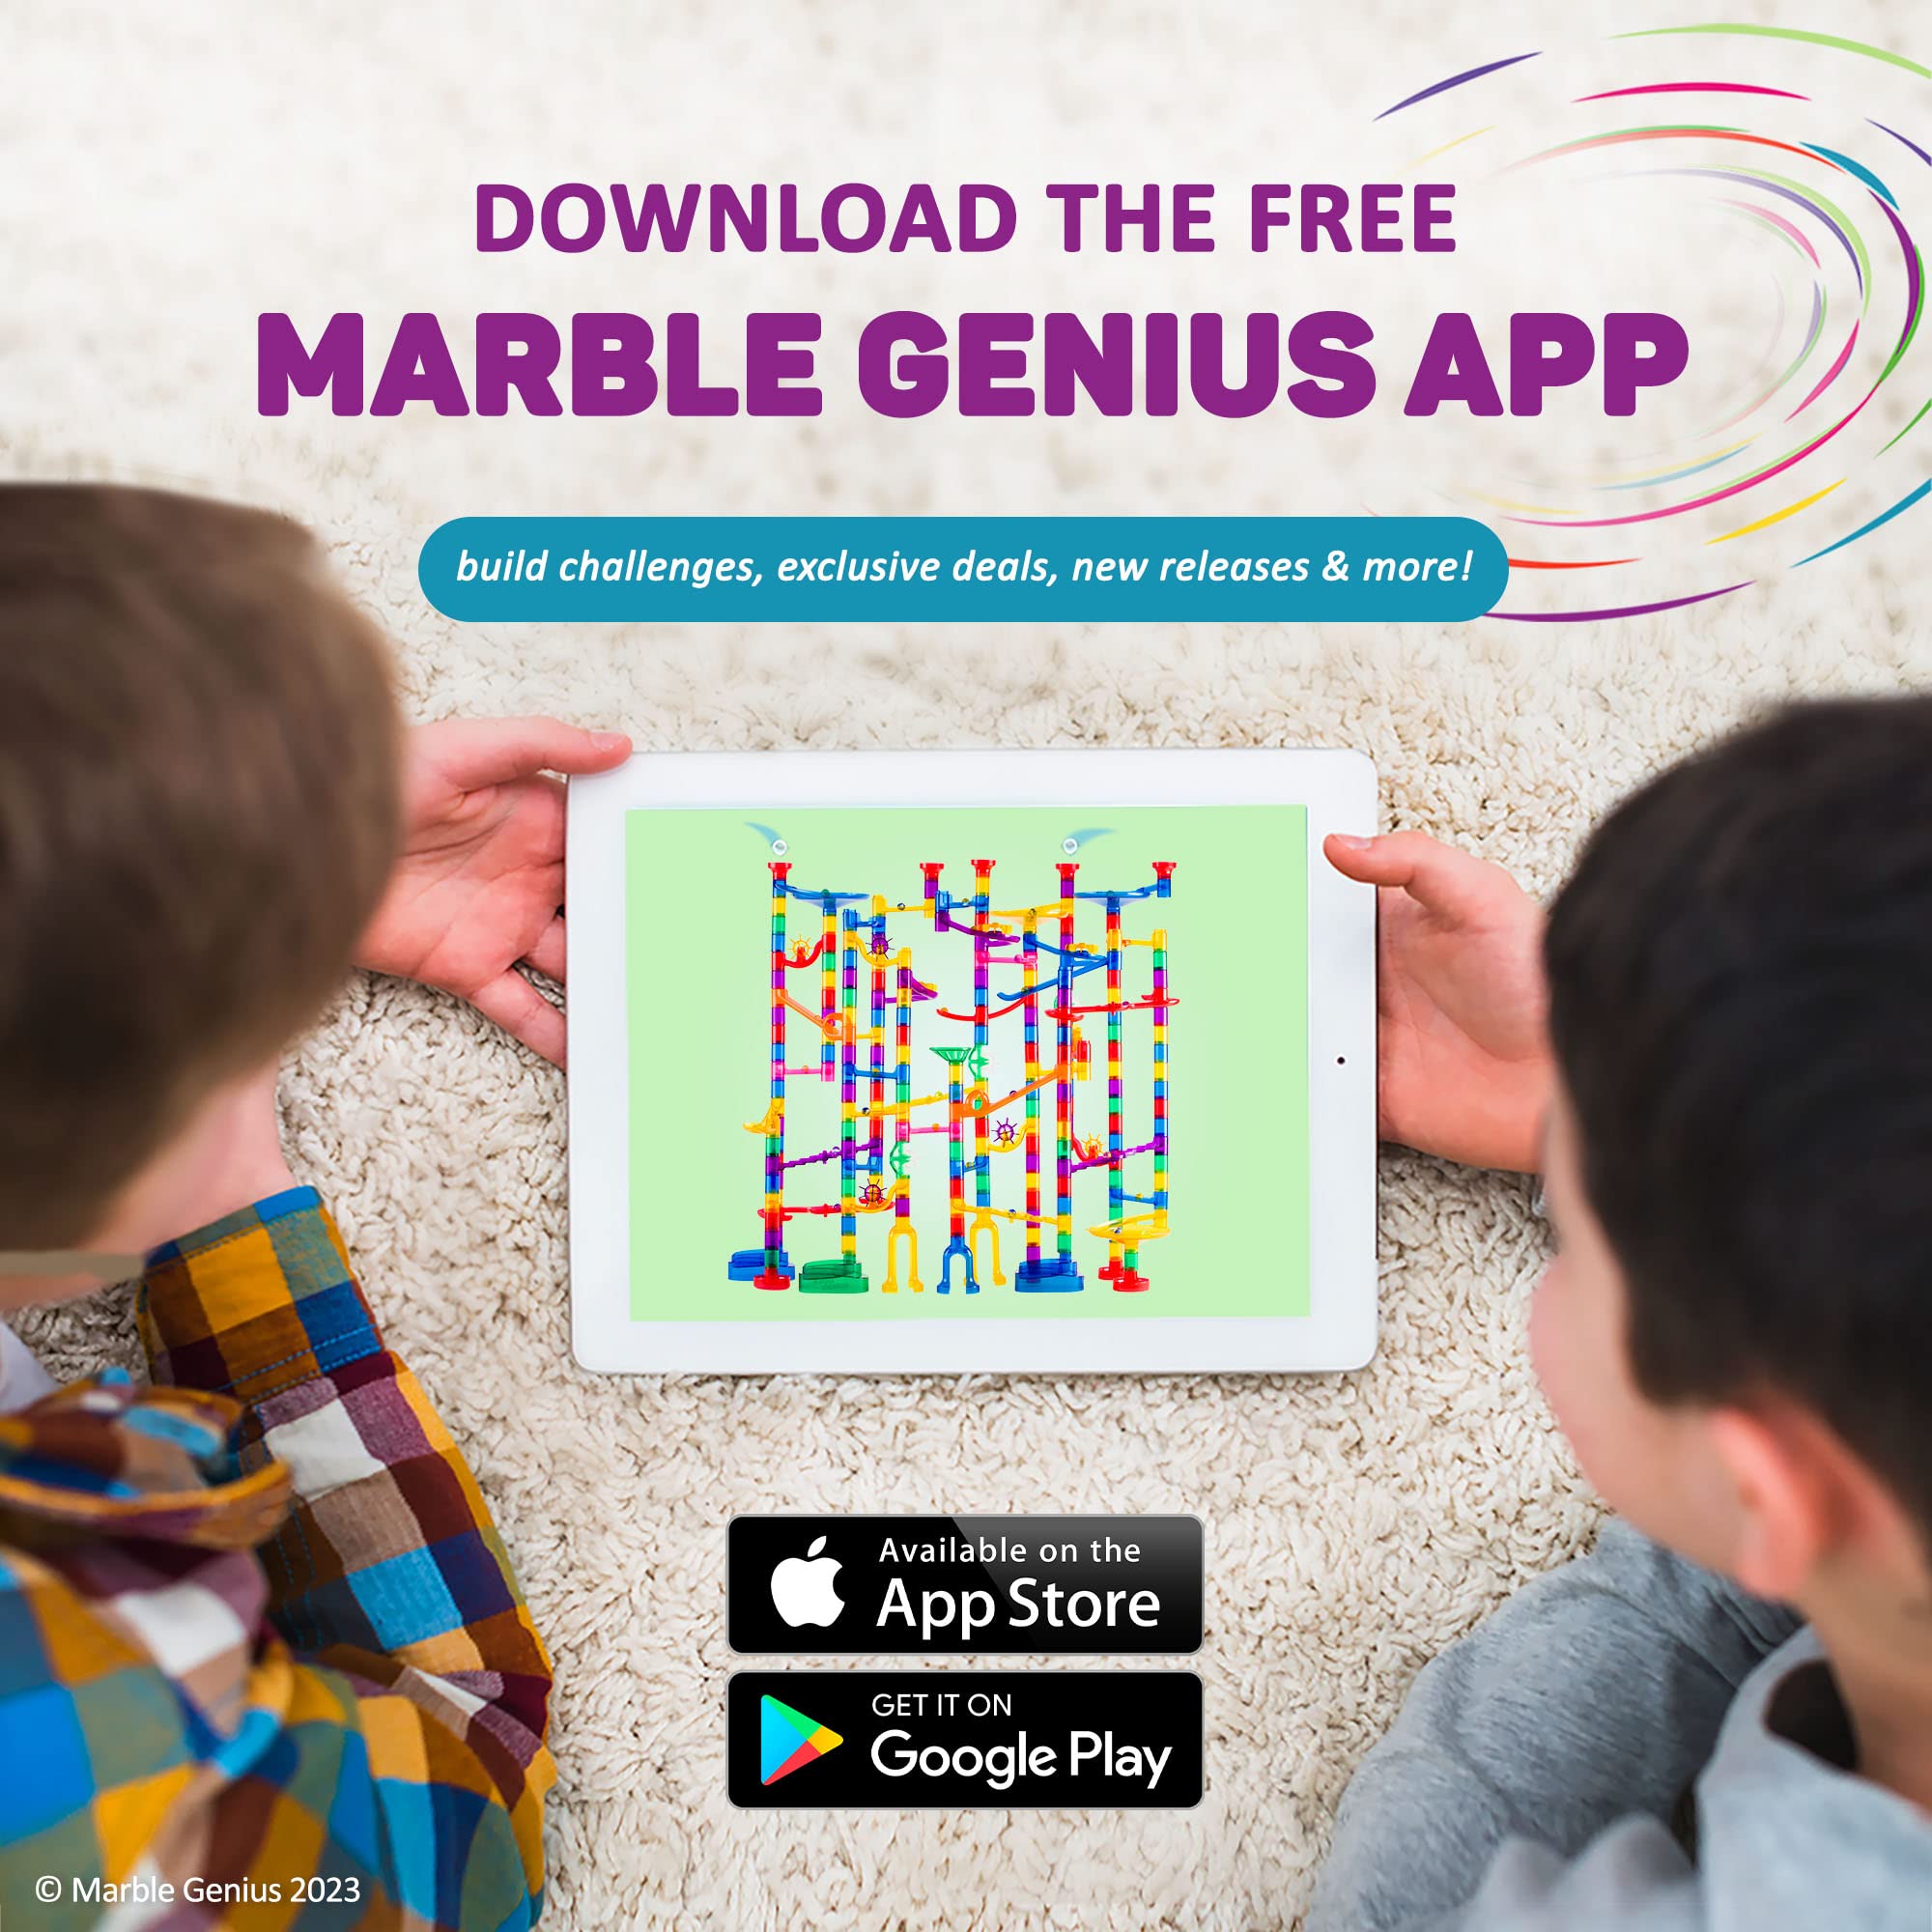 Marble Genius Physics Fun Marble Run Accessory Add-On Set (5 Pieces) - Get Ready to Engage in Endless Hours of Fun and Learning - Watch Your Marbles Race Through This Unique and Innovative Add-On